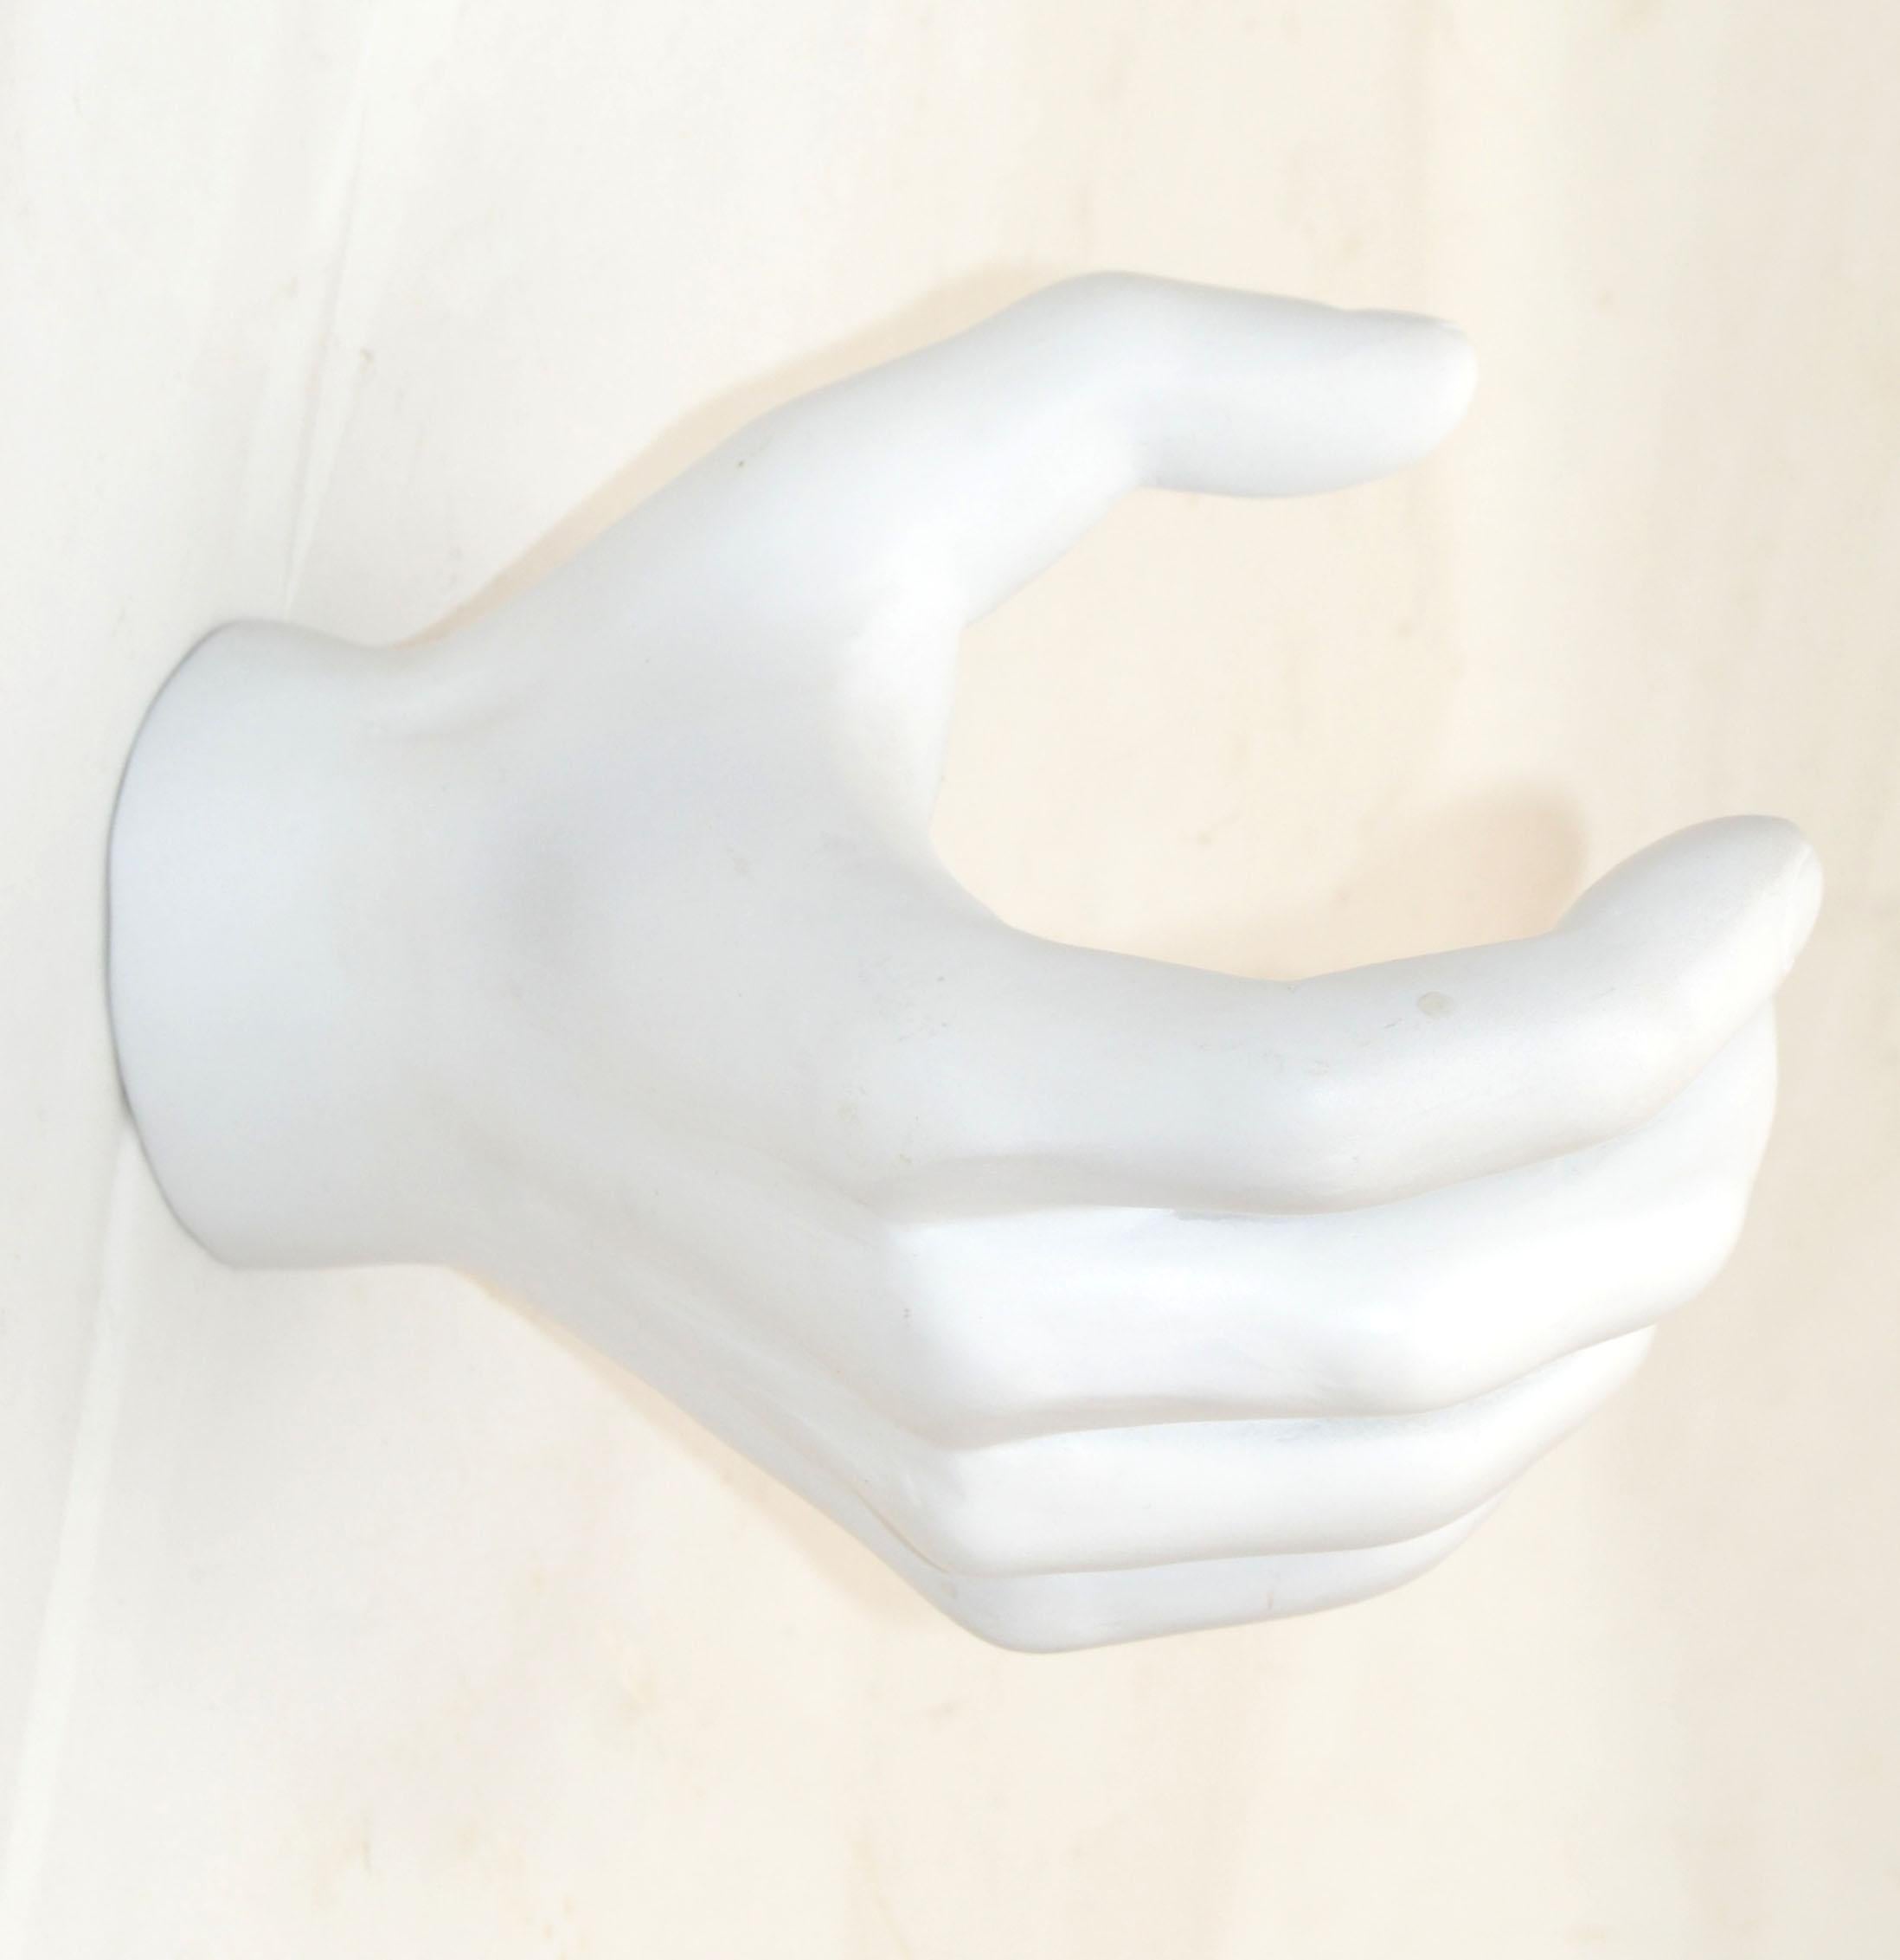 Hand-Crafted White Resin Wall Mounted Figurative Hand Sculpture Mid-Century Modern Key Holder For Sale